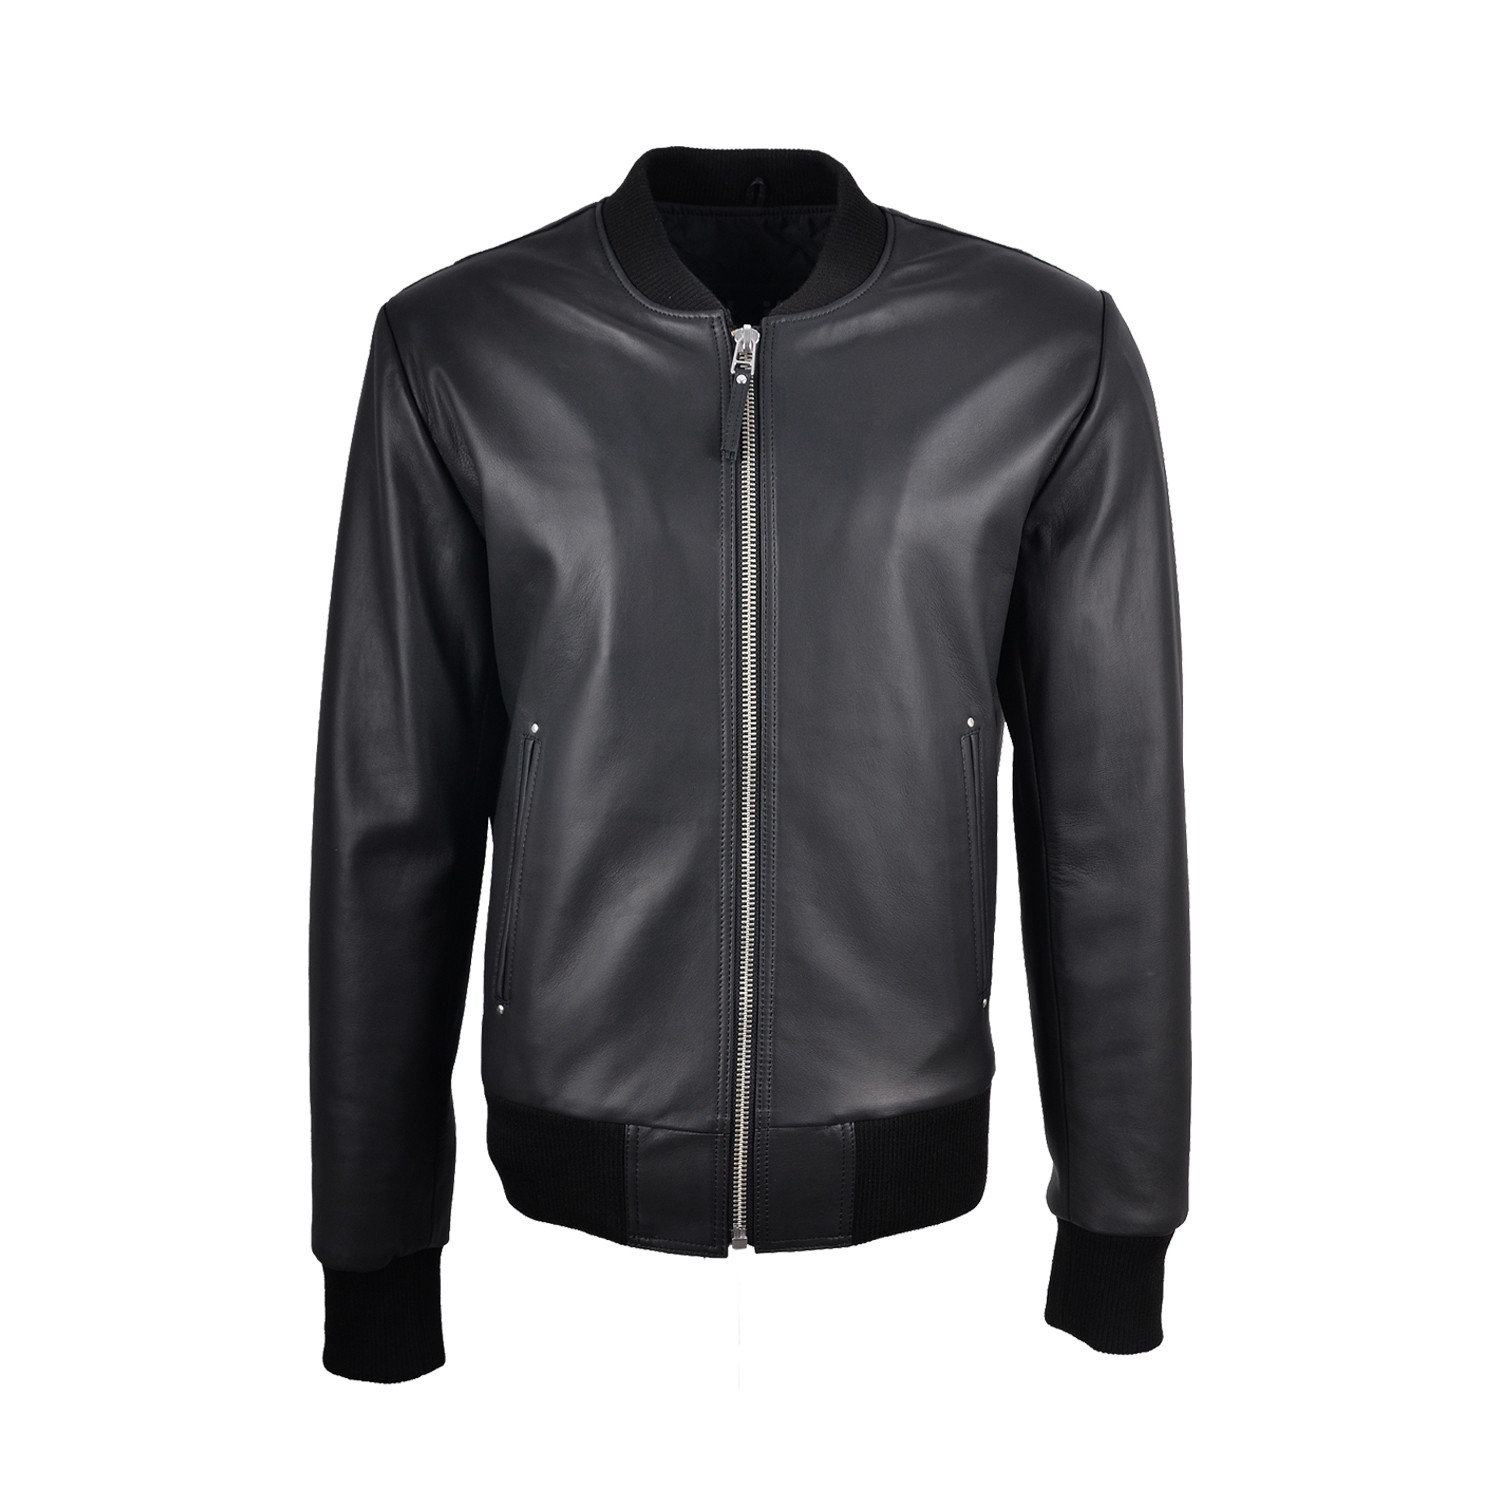 Classic College Model Genuine Leather Jacket for Men Handcrafted Black Soft Lambskin Outerwear Colin